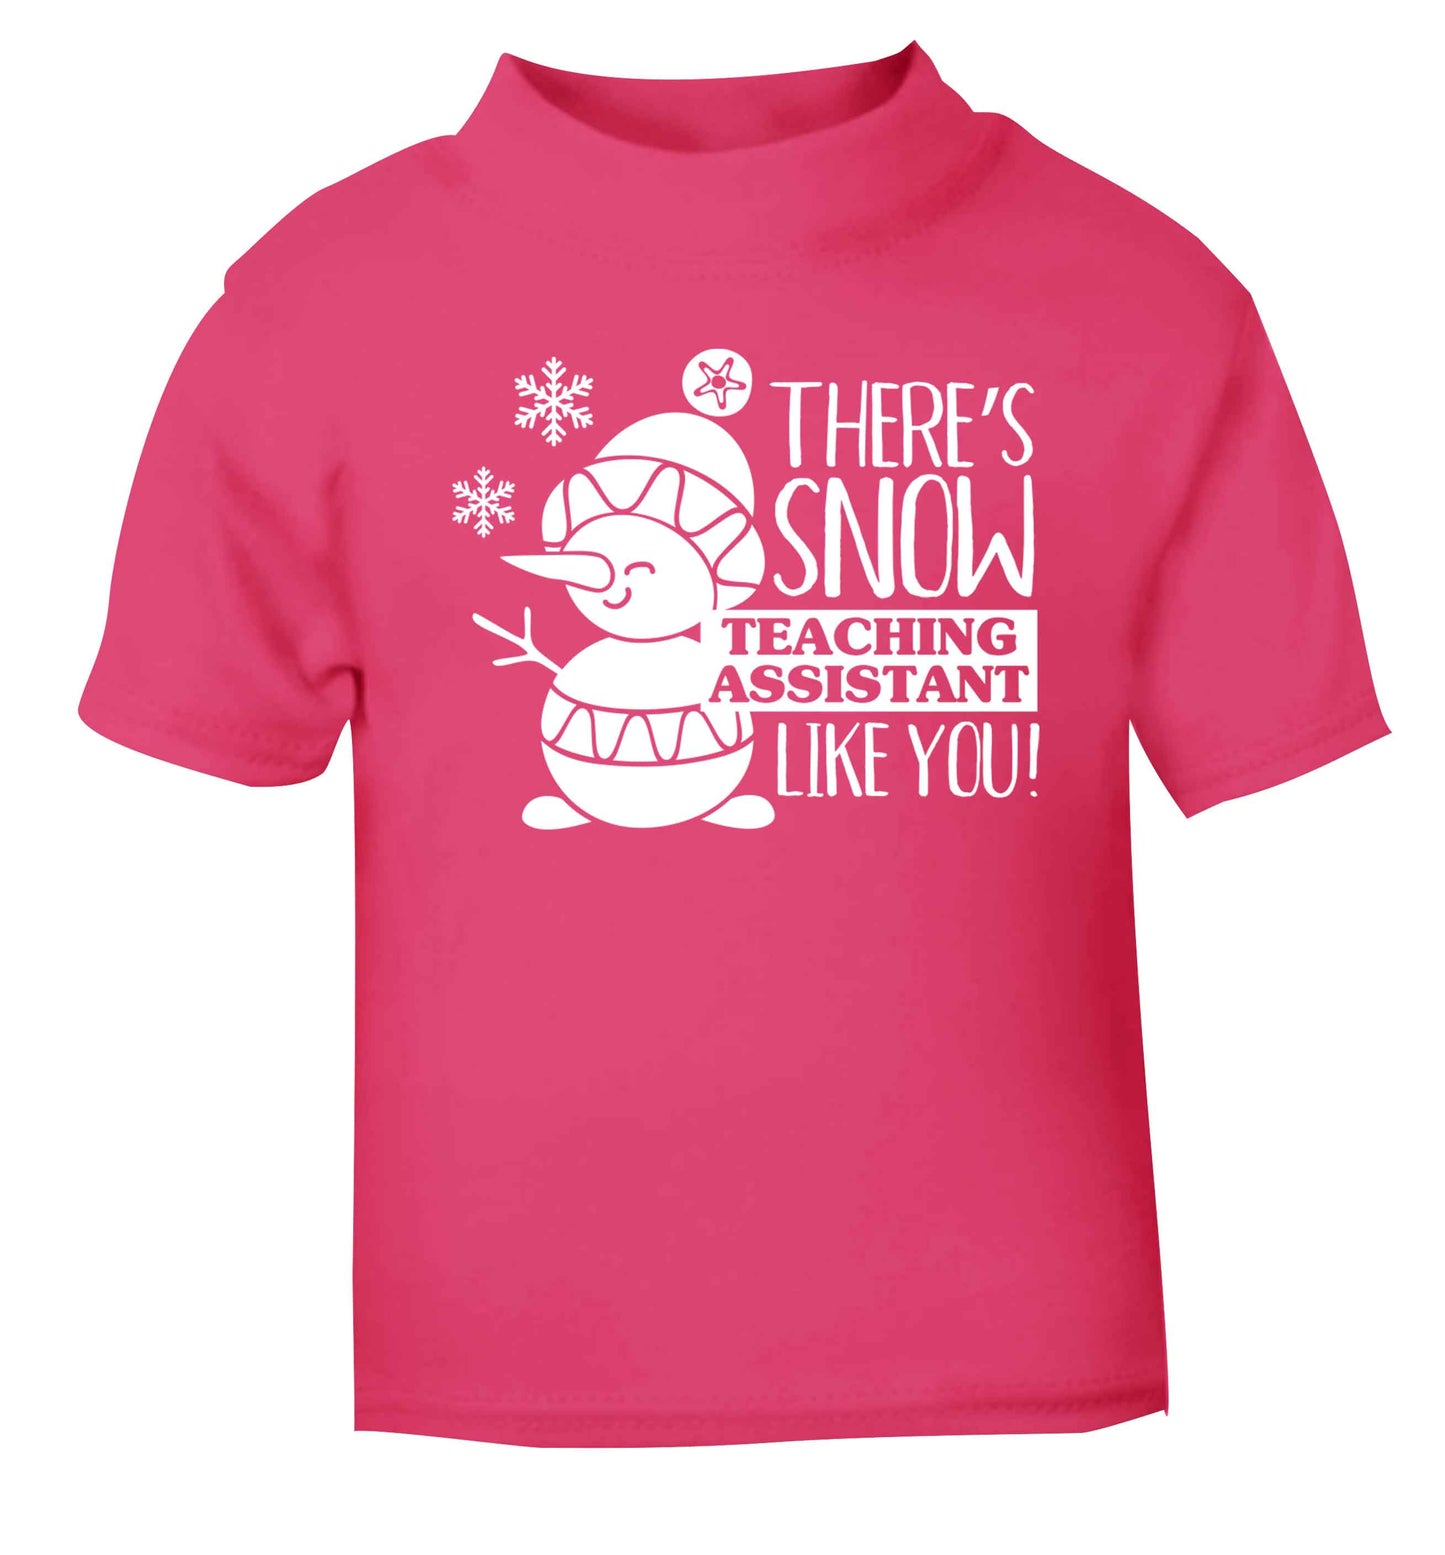 There's snow teaching assistant like you pink baby toddler Tshirt 2 Years